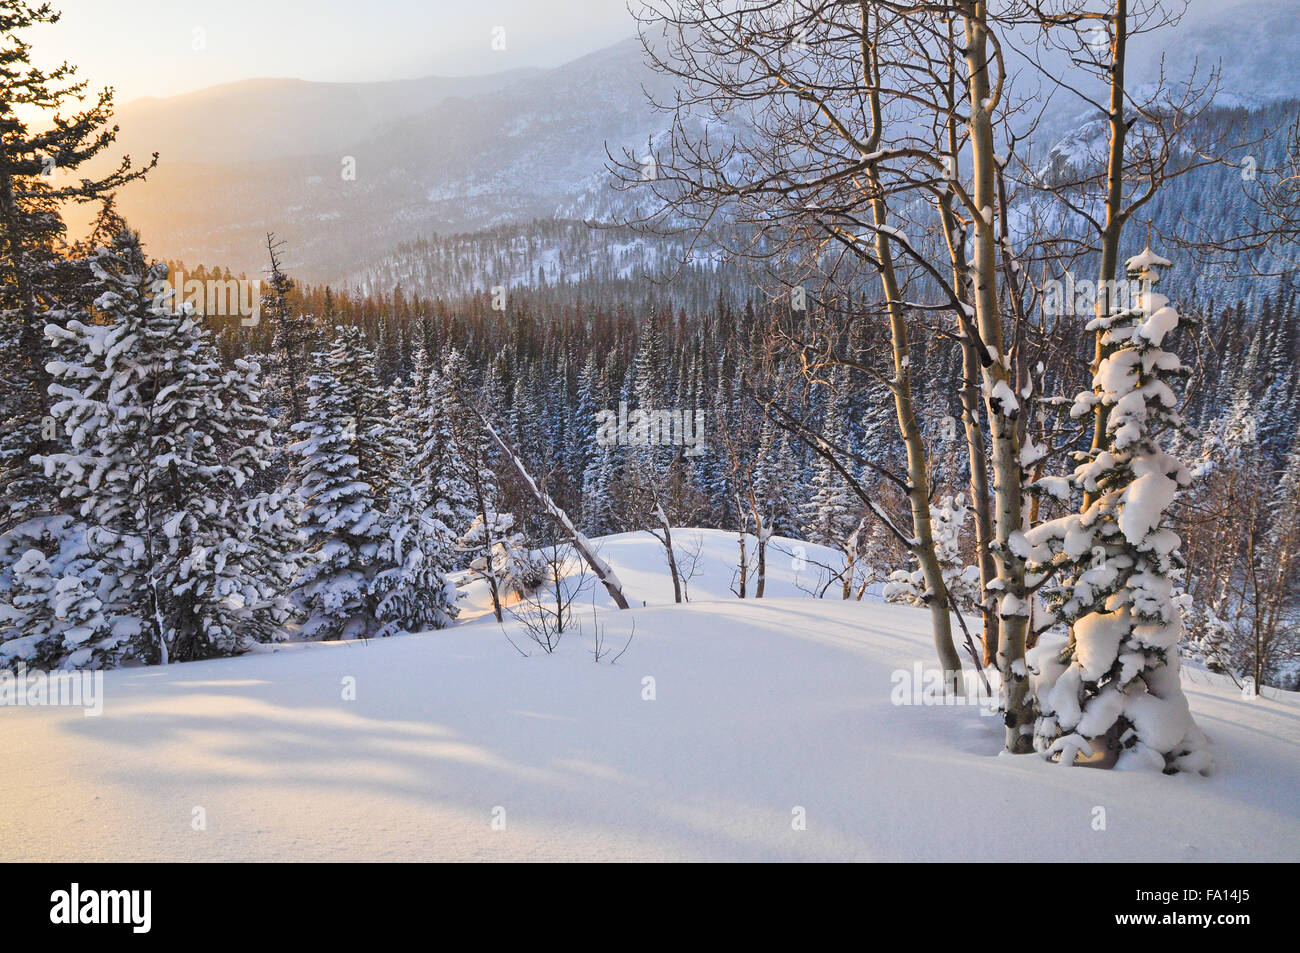 Early morning fresh snowfall in the Rocky Mountains. Stock Photo